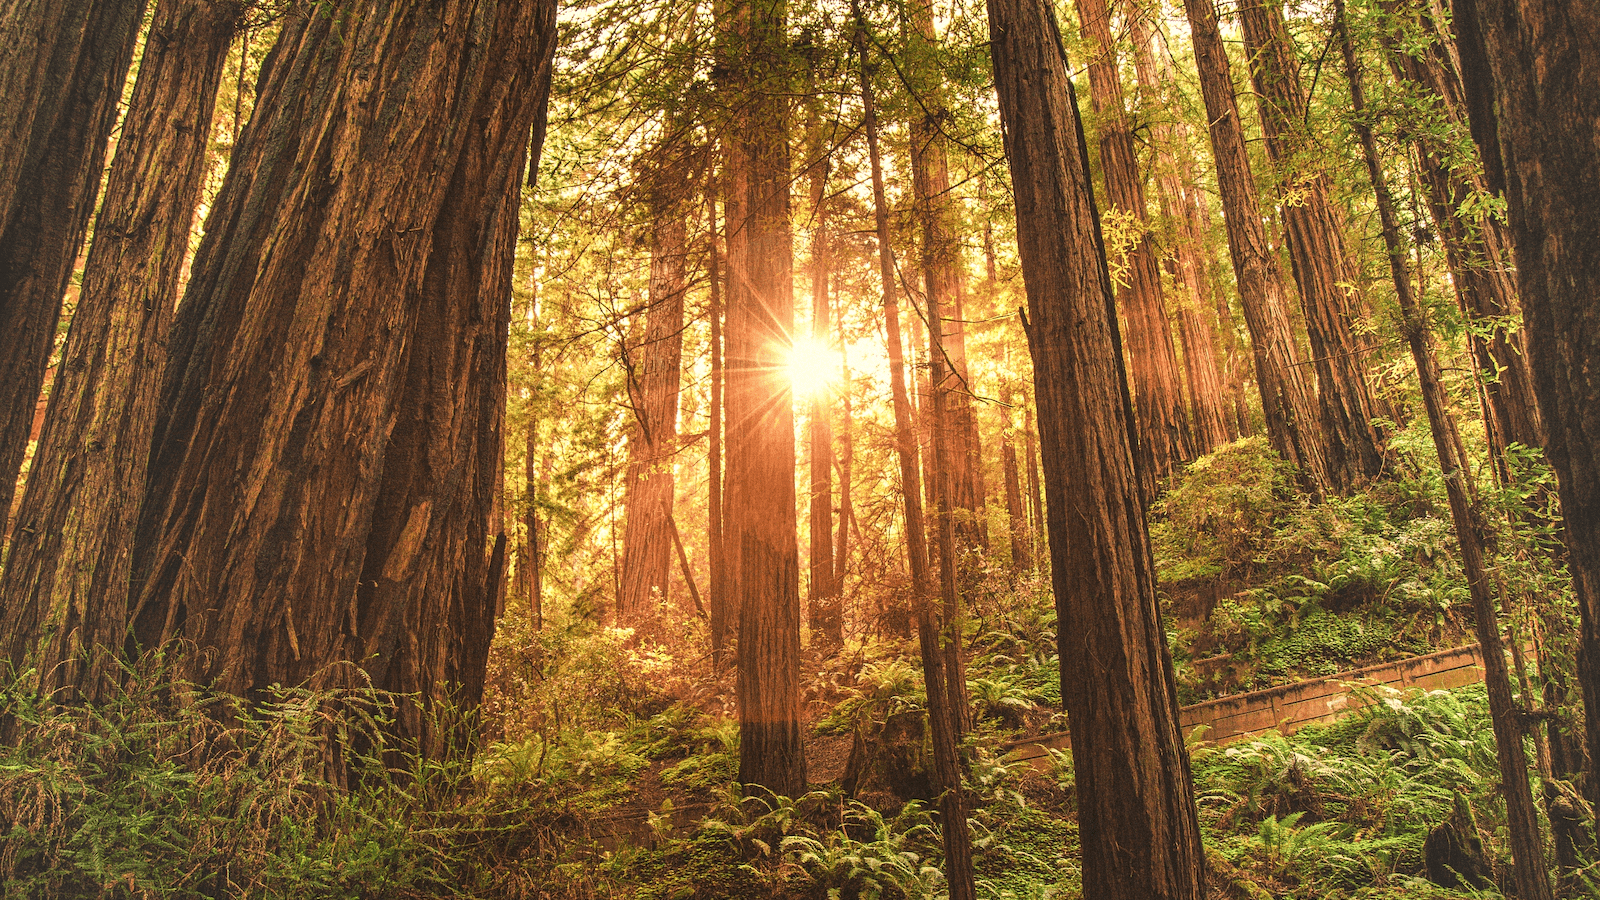 The sun shines through a redwood forrest at Muir Woods